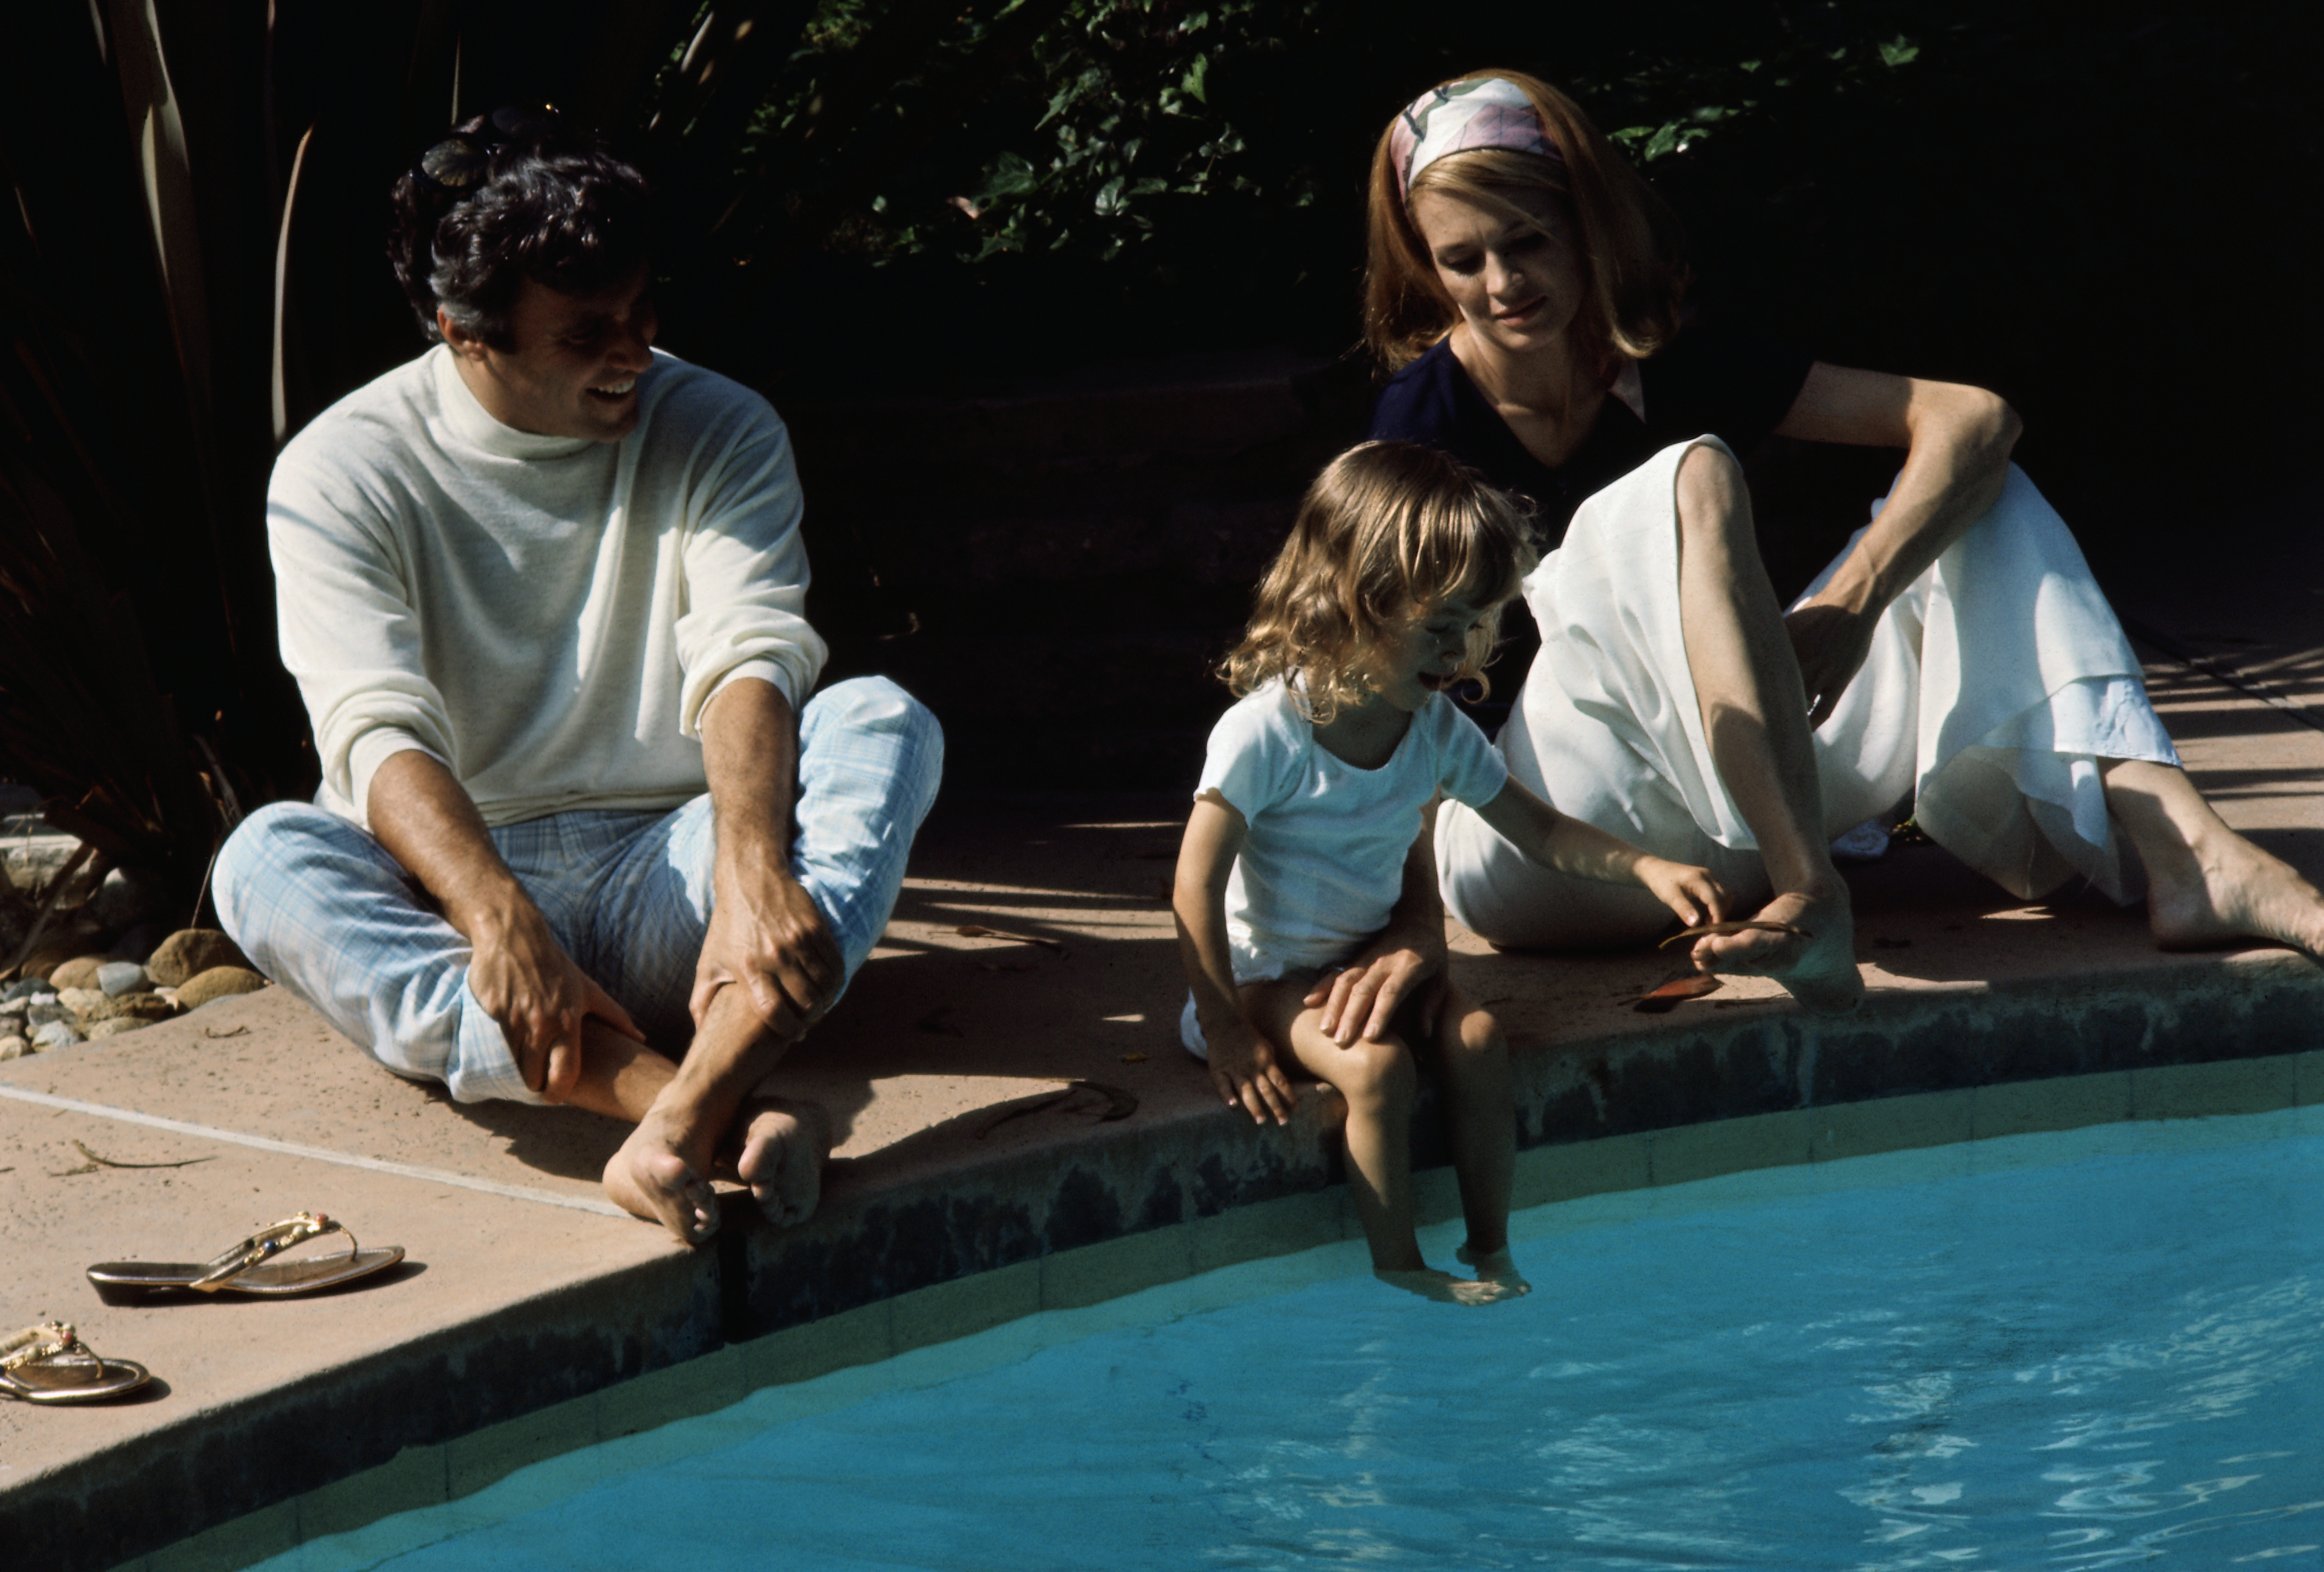 Burt Bacharach pictured with Angie Dickinson and their child Lea around the swimming pool of their home on June 3, 1969 in Hollywood | Source: Getty Images